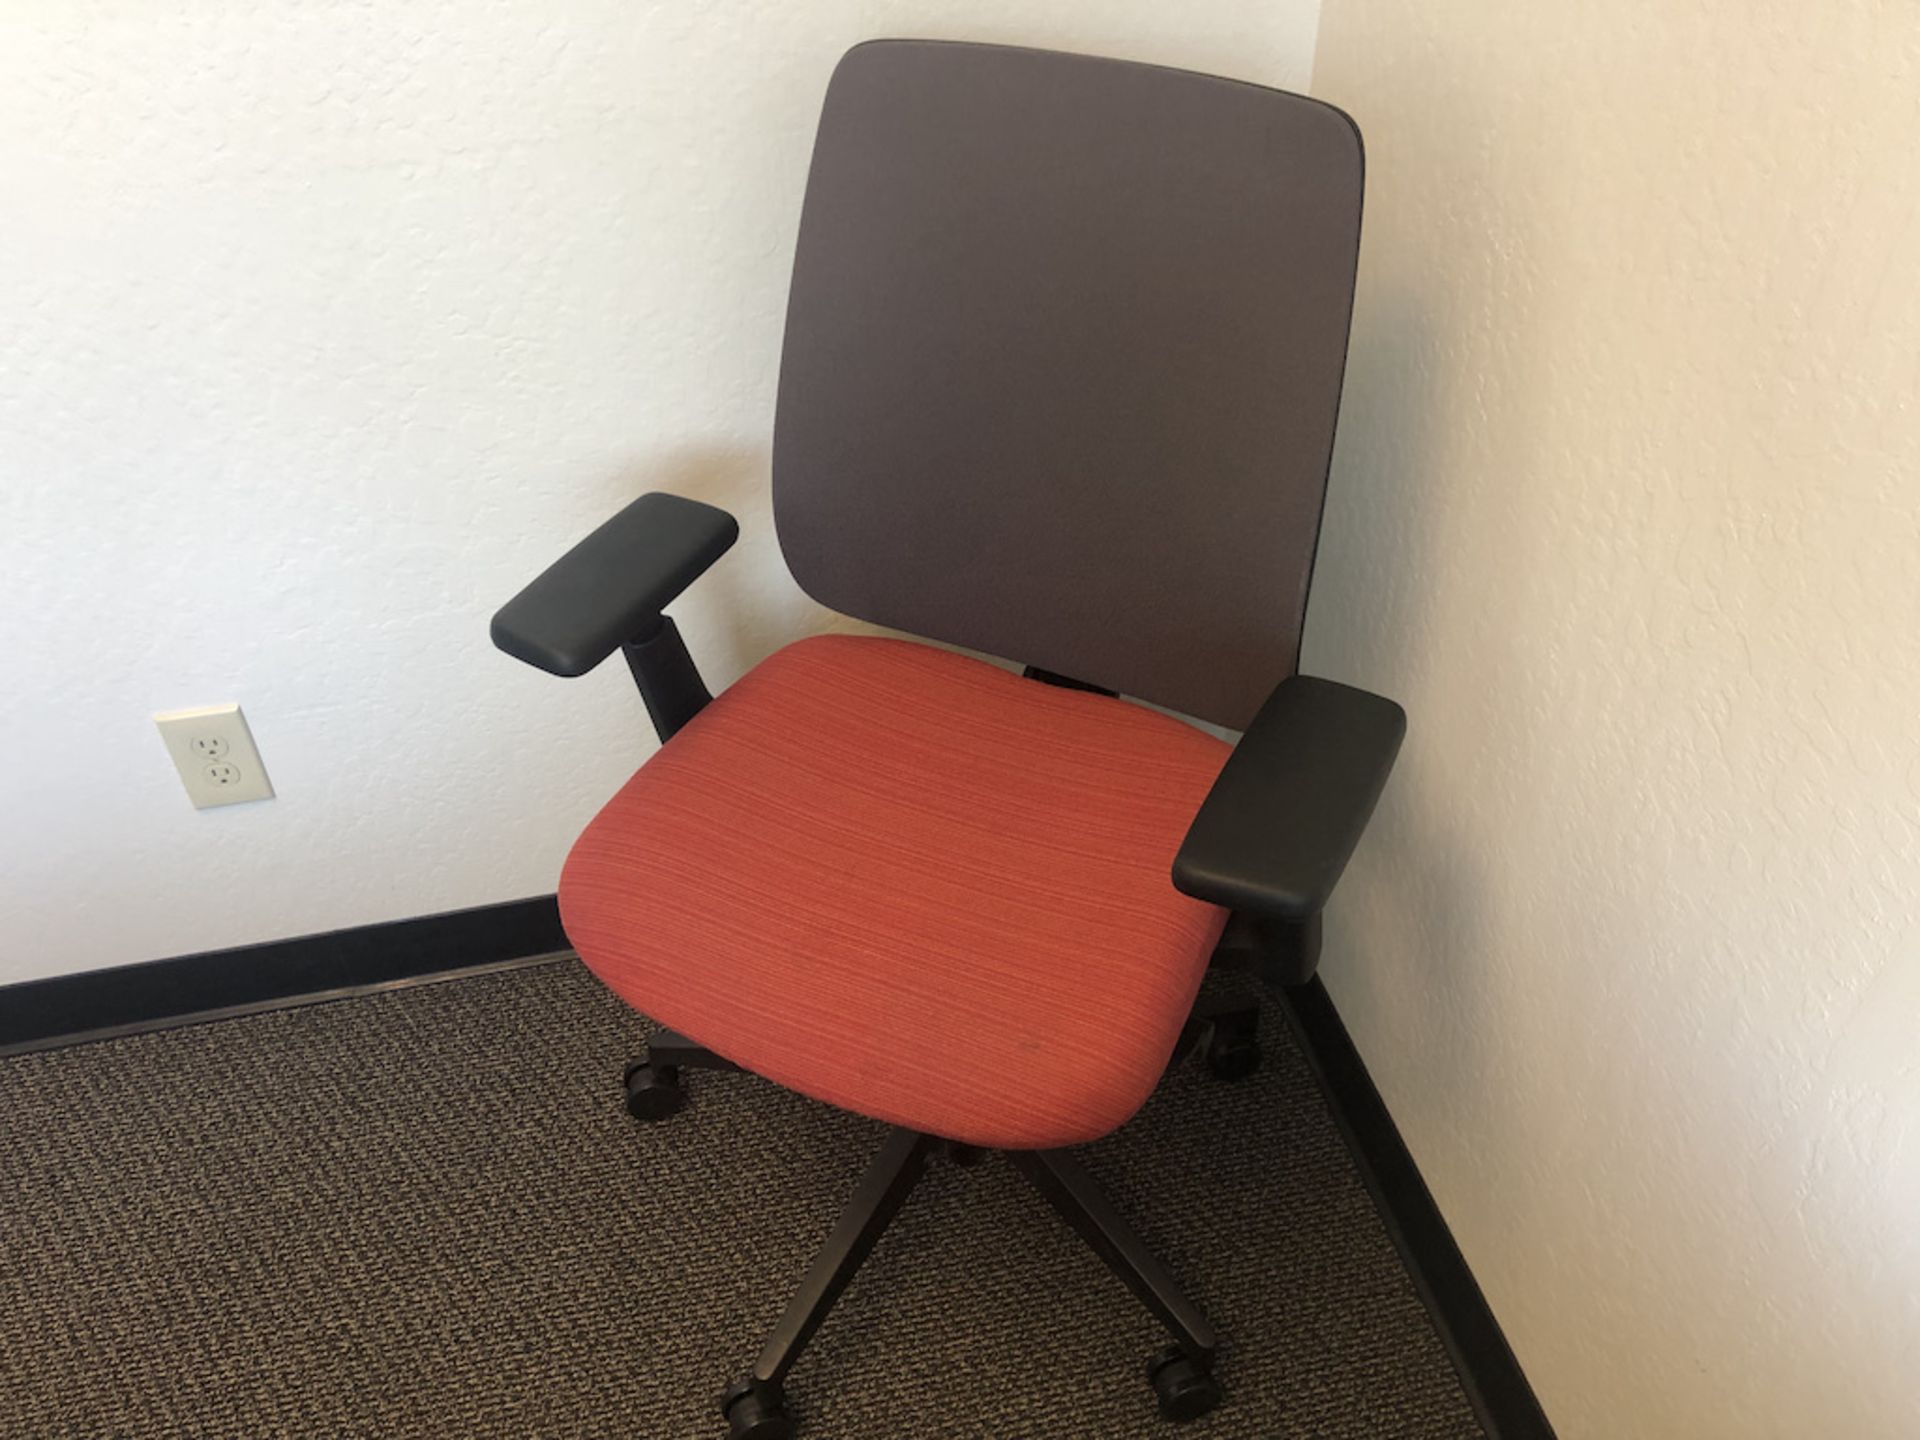 5 CASTER OFFICE CHAIR WITH RED SEAT CUSHION W/ ARM RESTS - Image 3 of 3